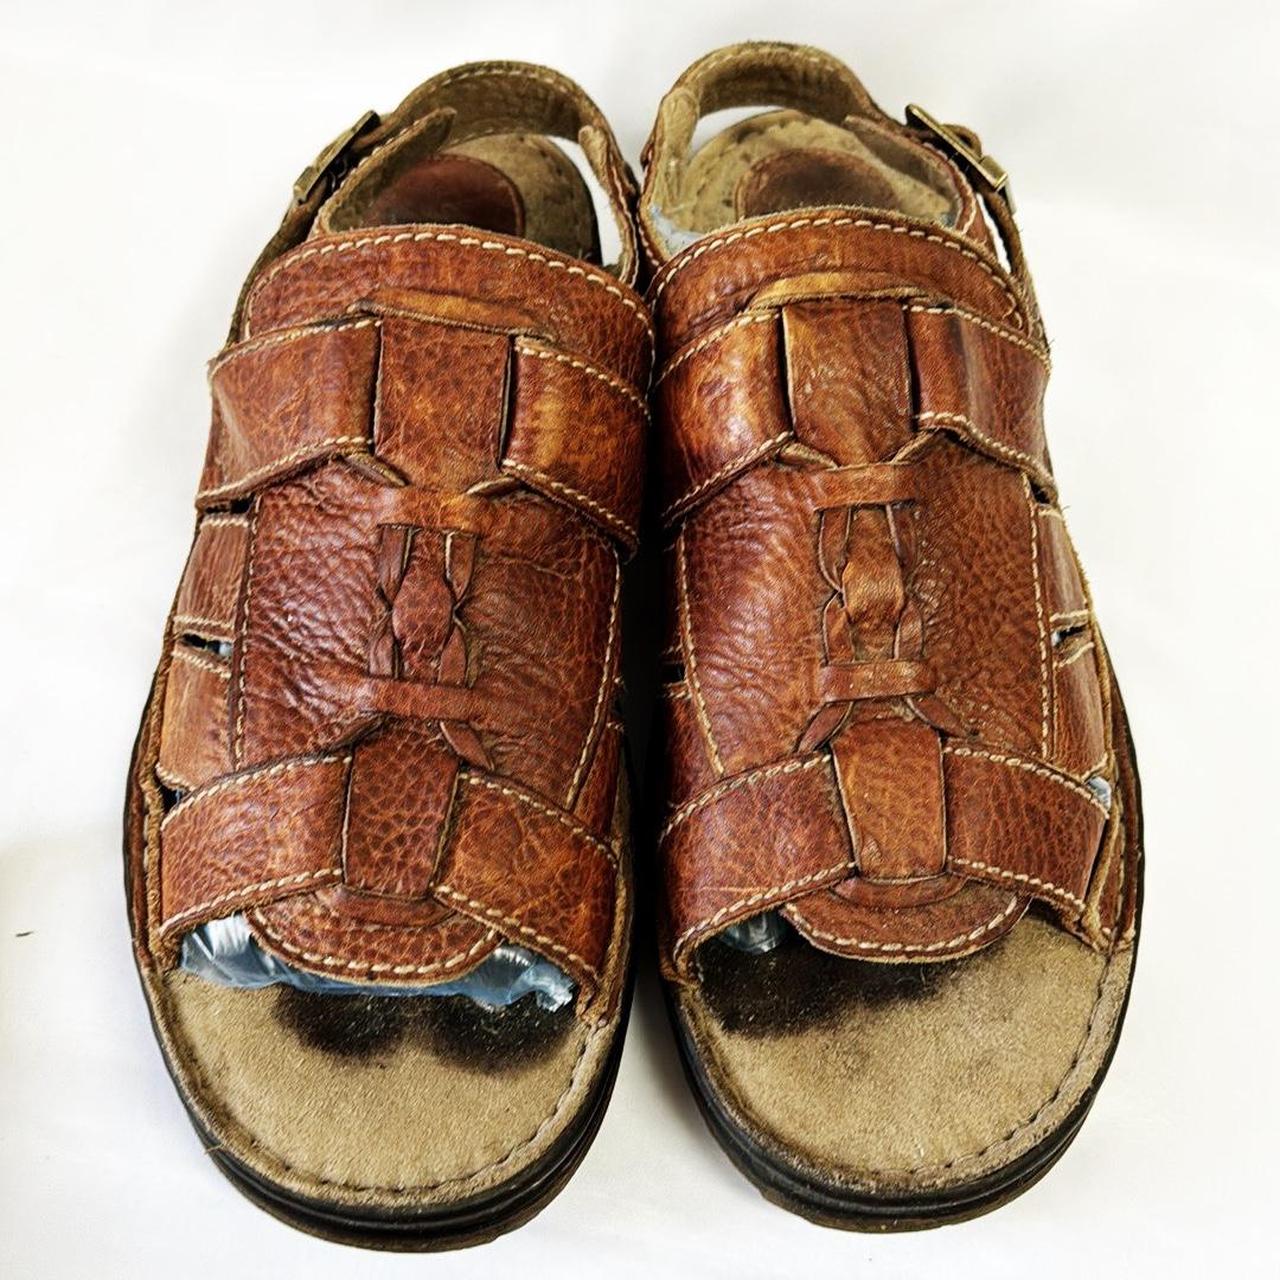 Preserved Ancient Roman leather shoes and sandals found in Northern England  : r/pics